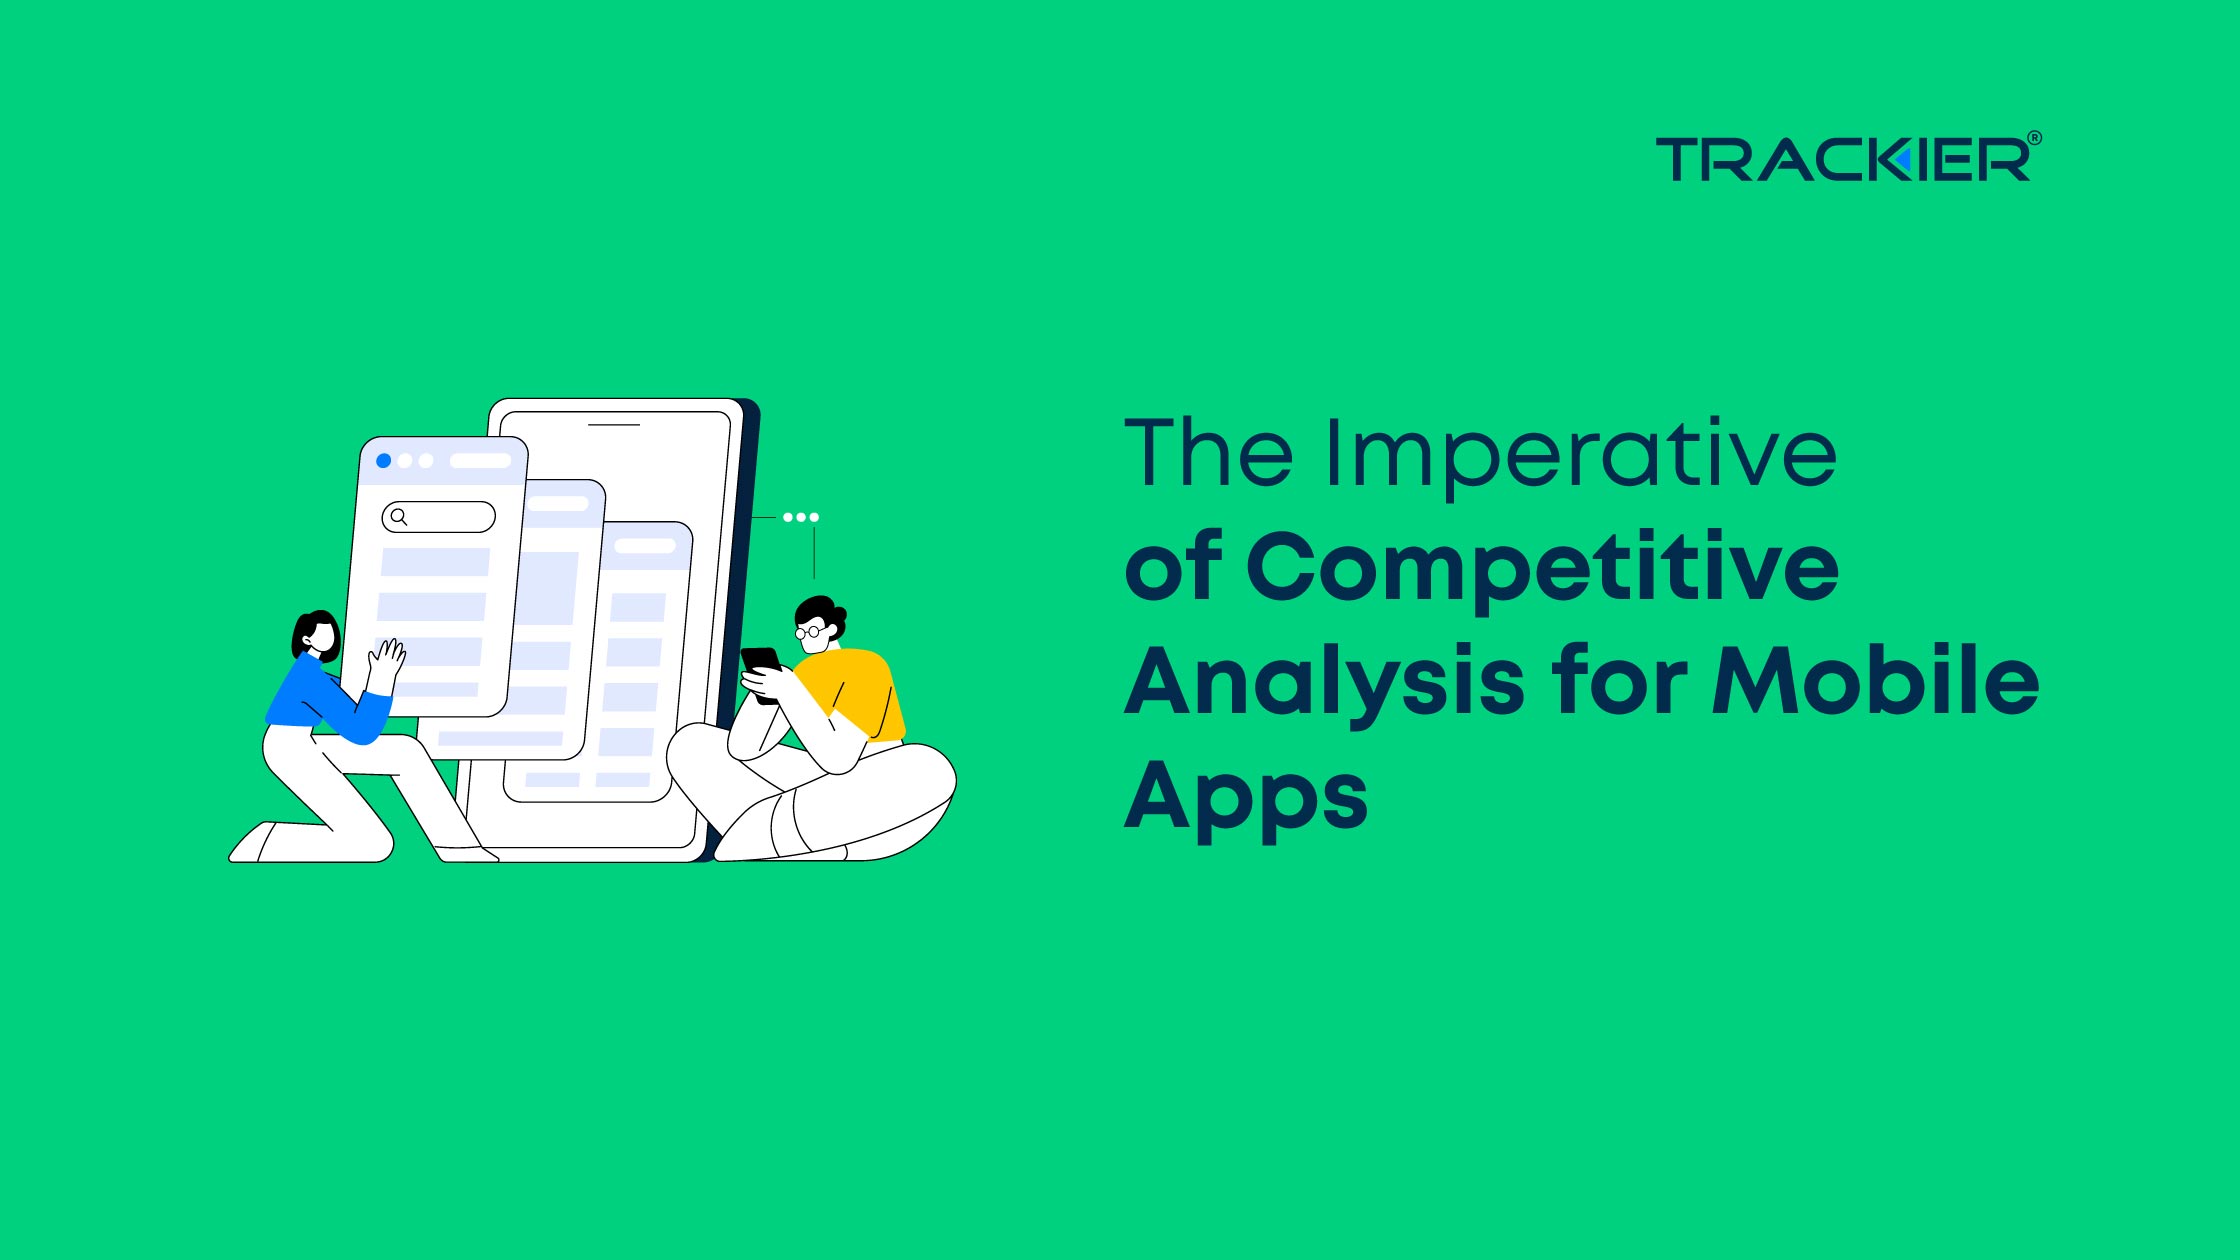 Competitive Analysis for Mobile Apps